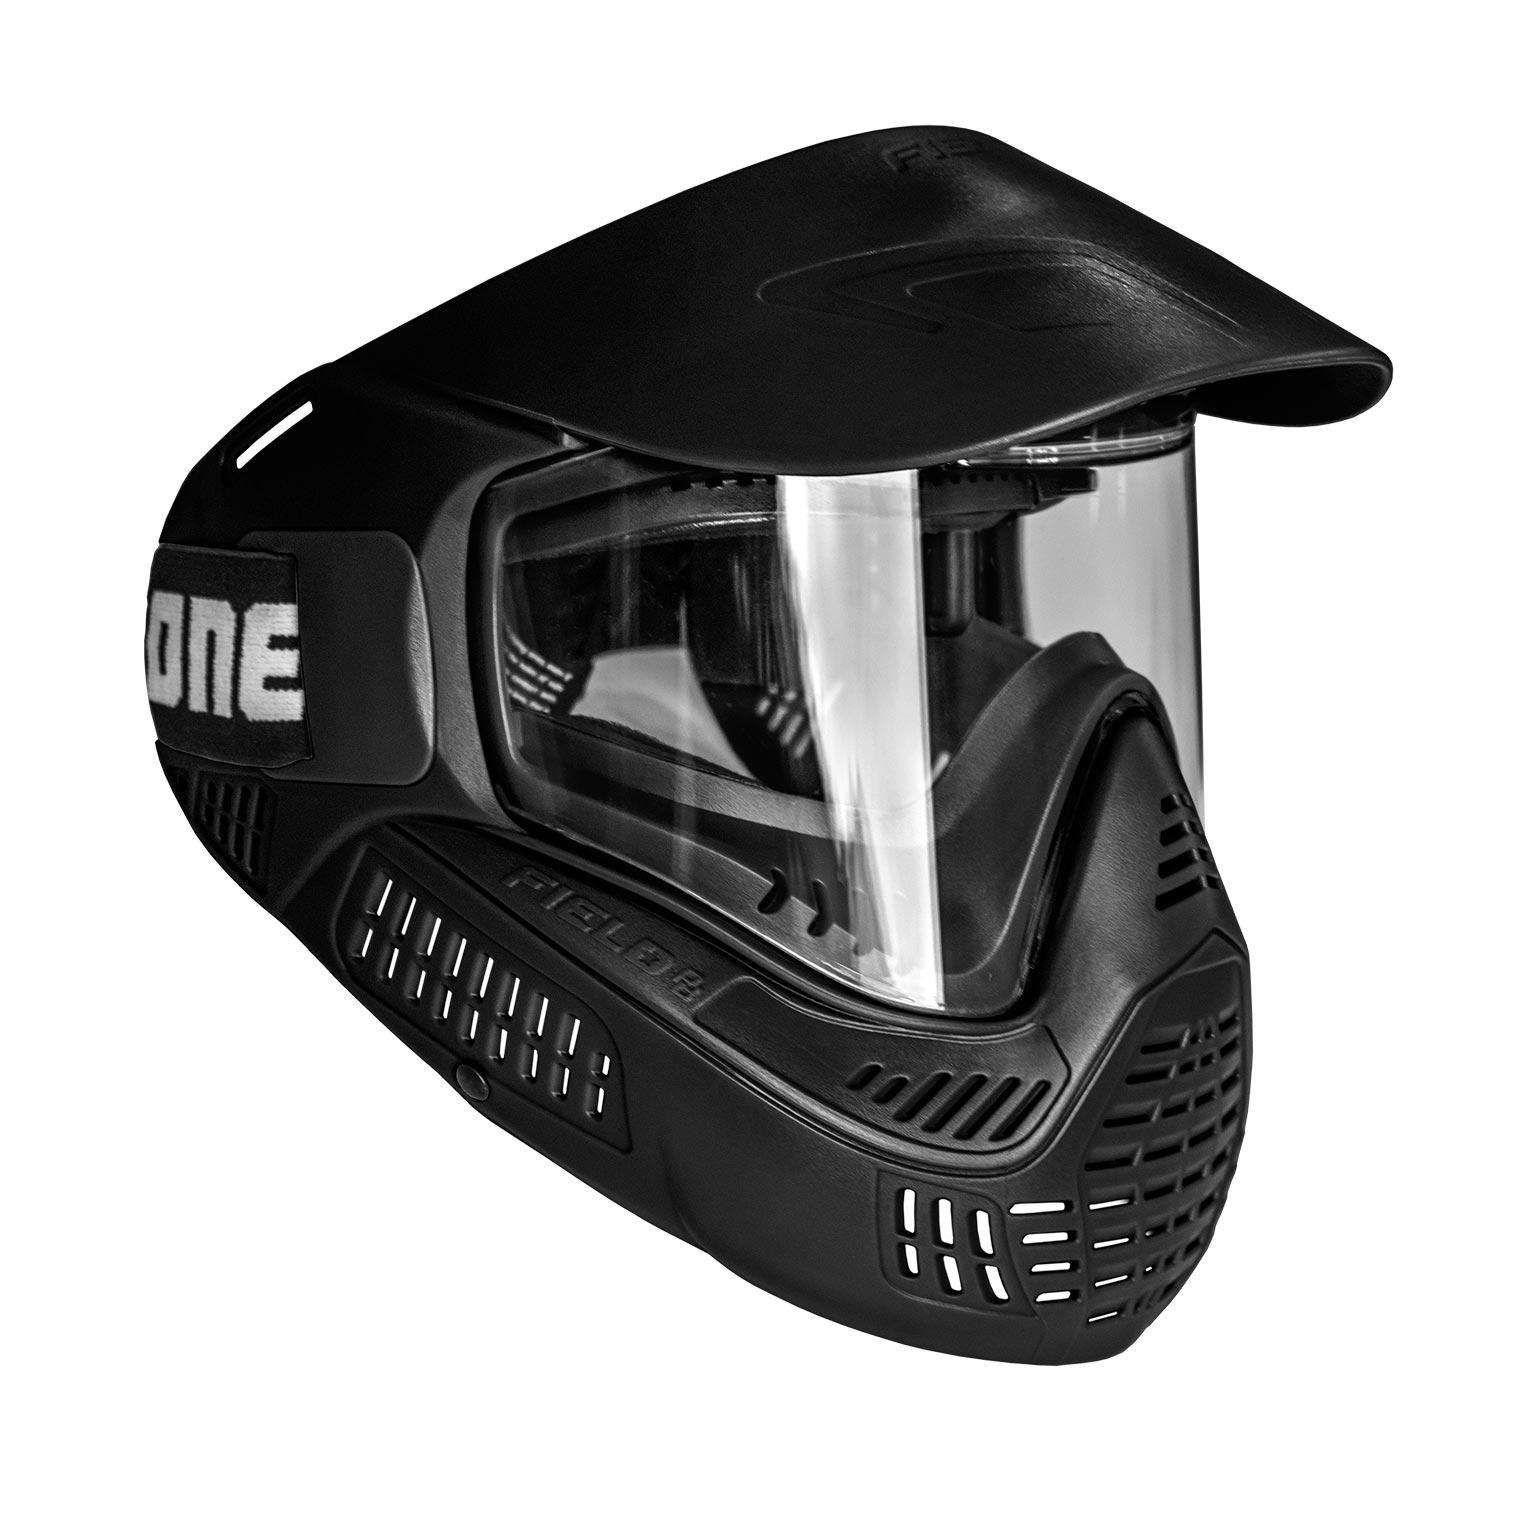 Paintball Mask # ONE Black Single Lens - Free 2/4 Day Shipping.*